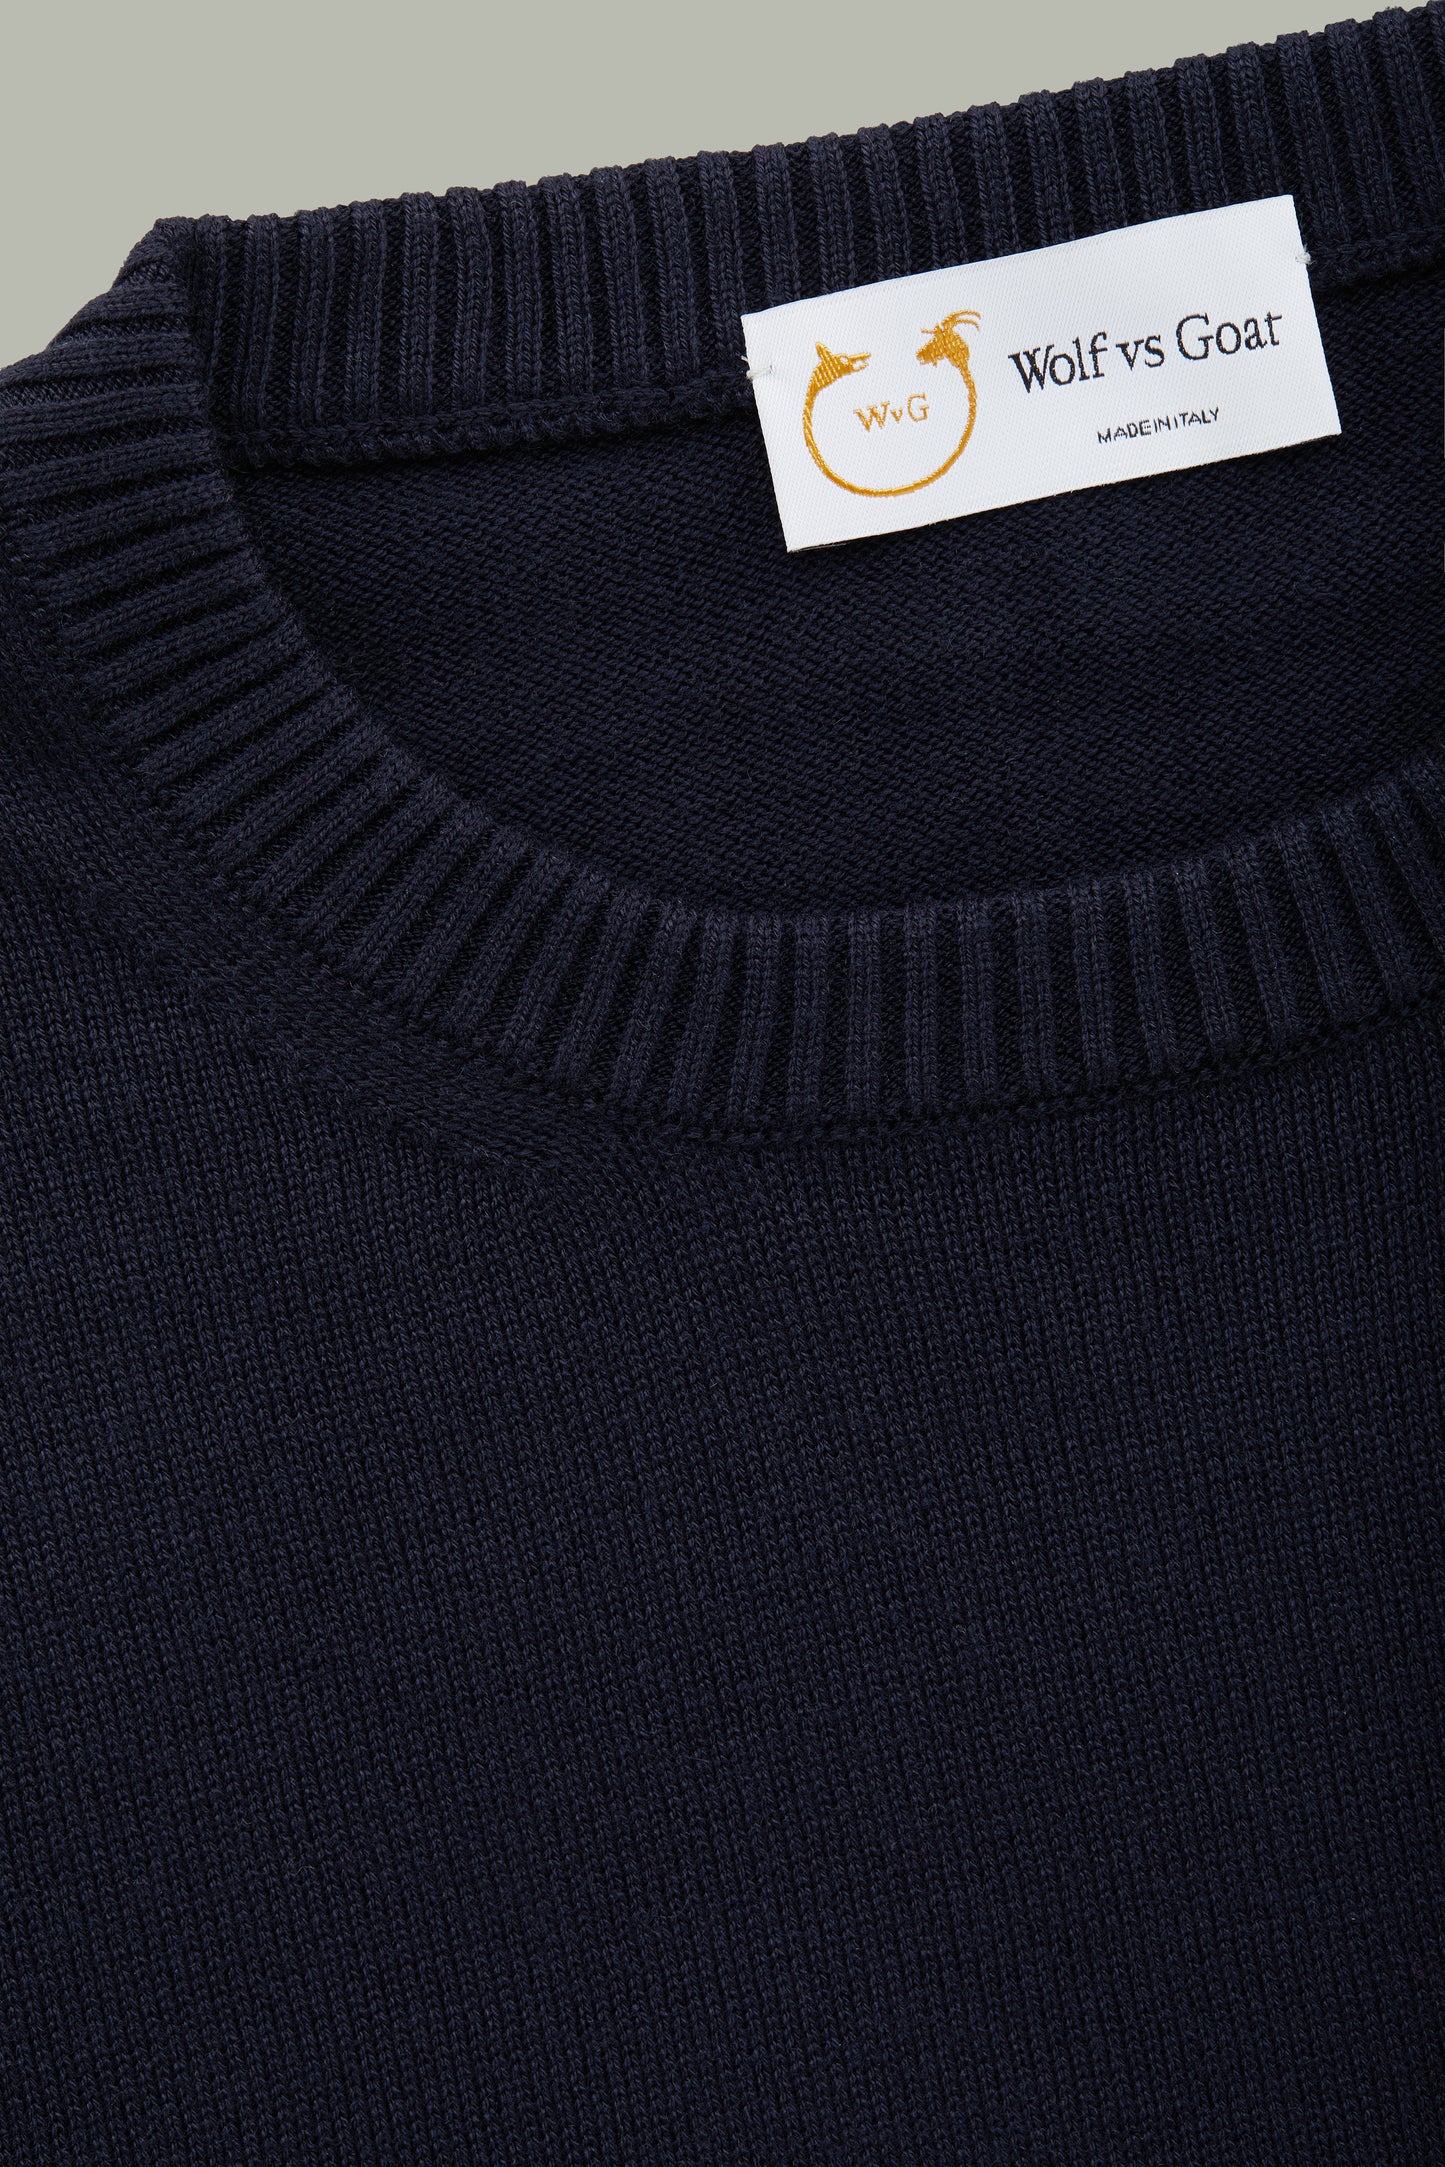 Long Sleeve Crew Neck Bamboo Cotton Cashmere Blend Knitted Sweater Navy